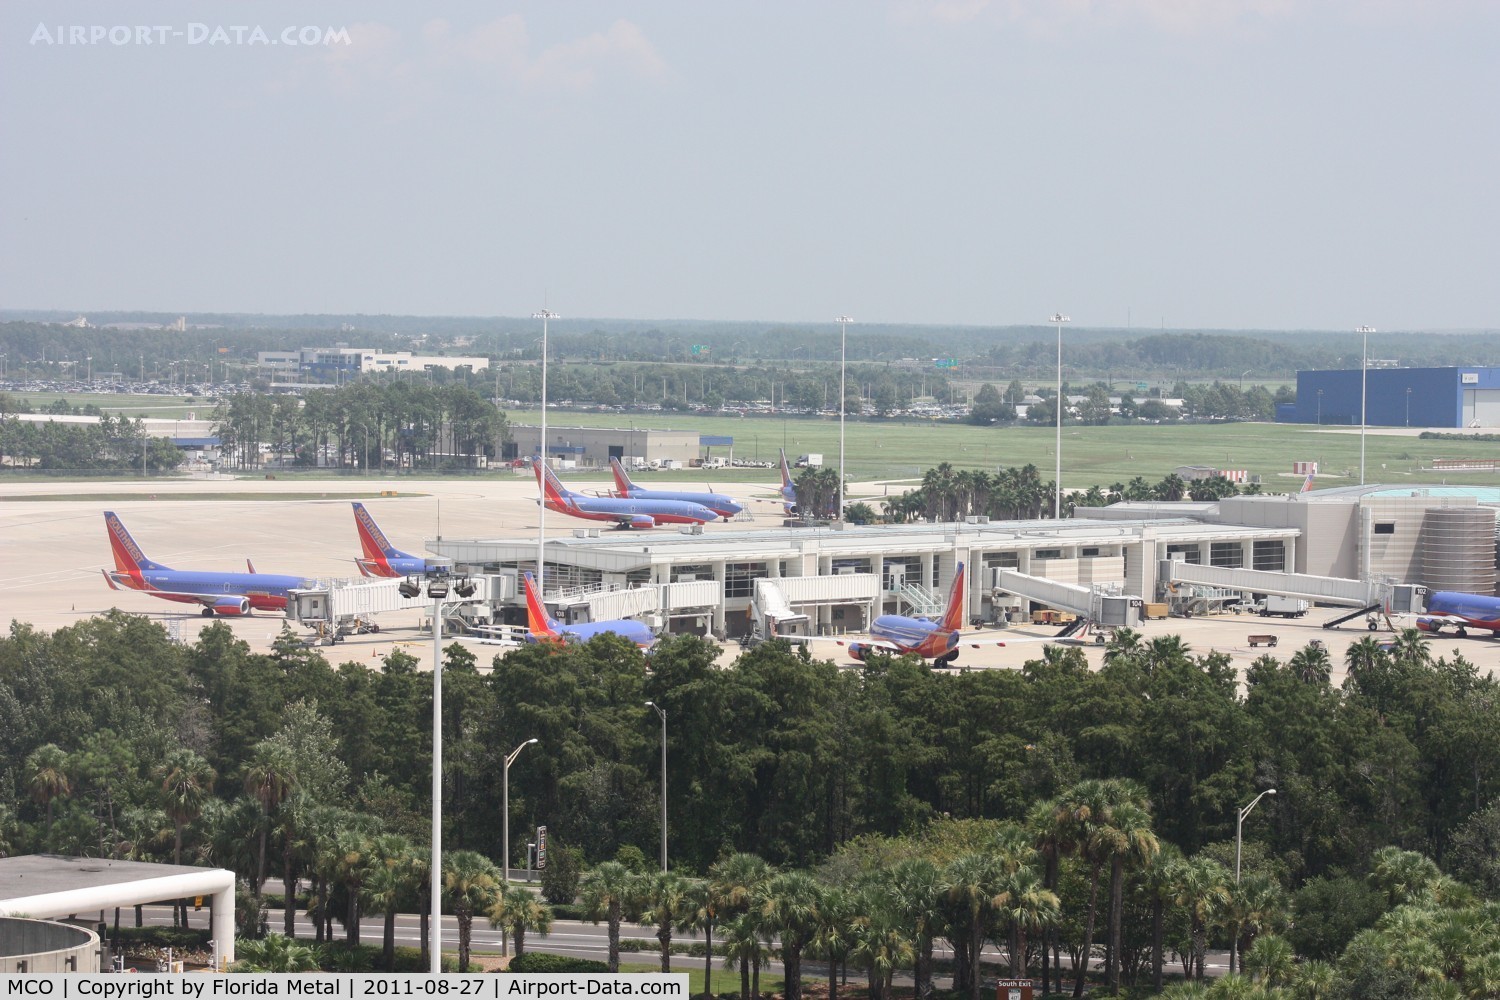 Orlando International Airport (MCO) - Southwest using all the gates in Airside 2 due to cancelled flights in the Northeast from Hurricane Irene - this was after Jet Blue moved to Airside 1 and before Air Tran moved to Airside 2